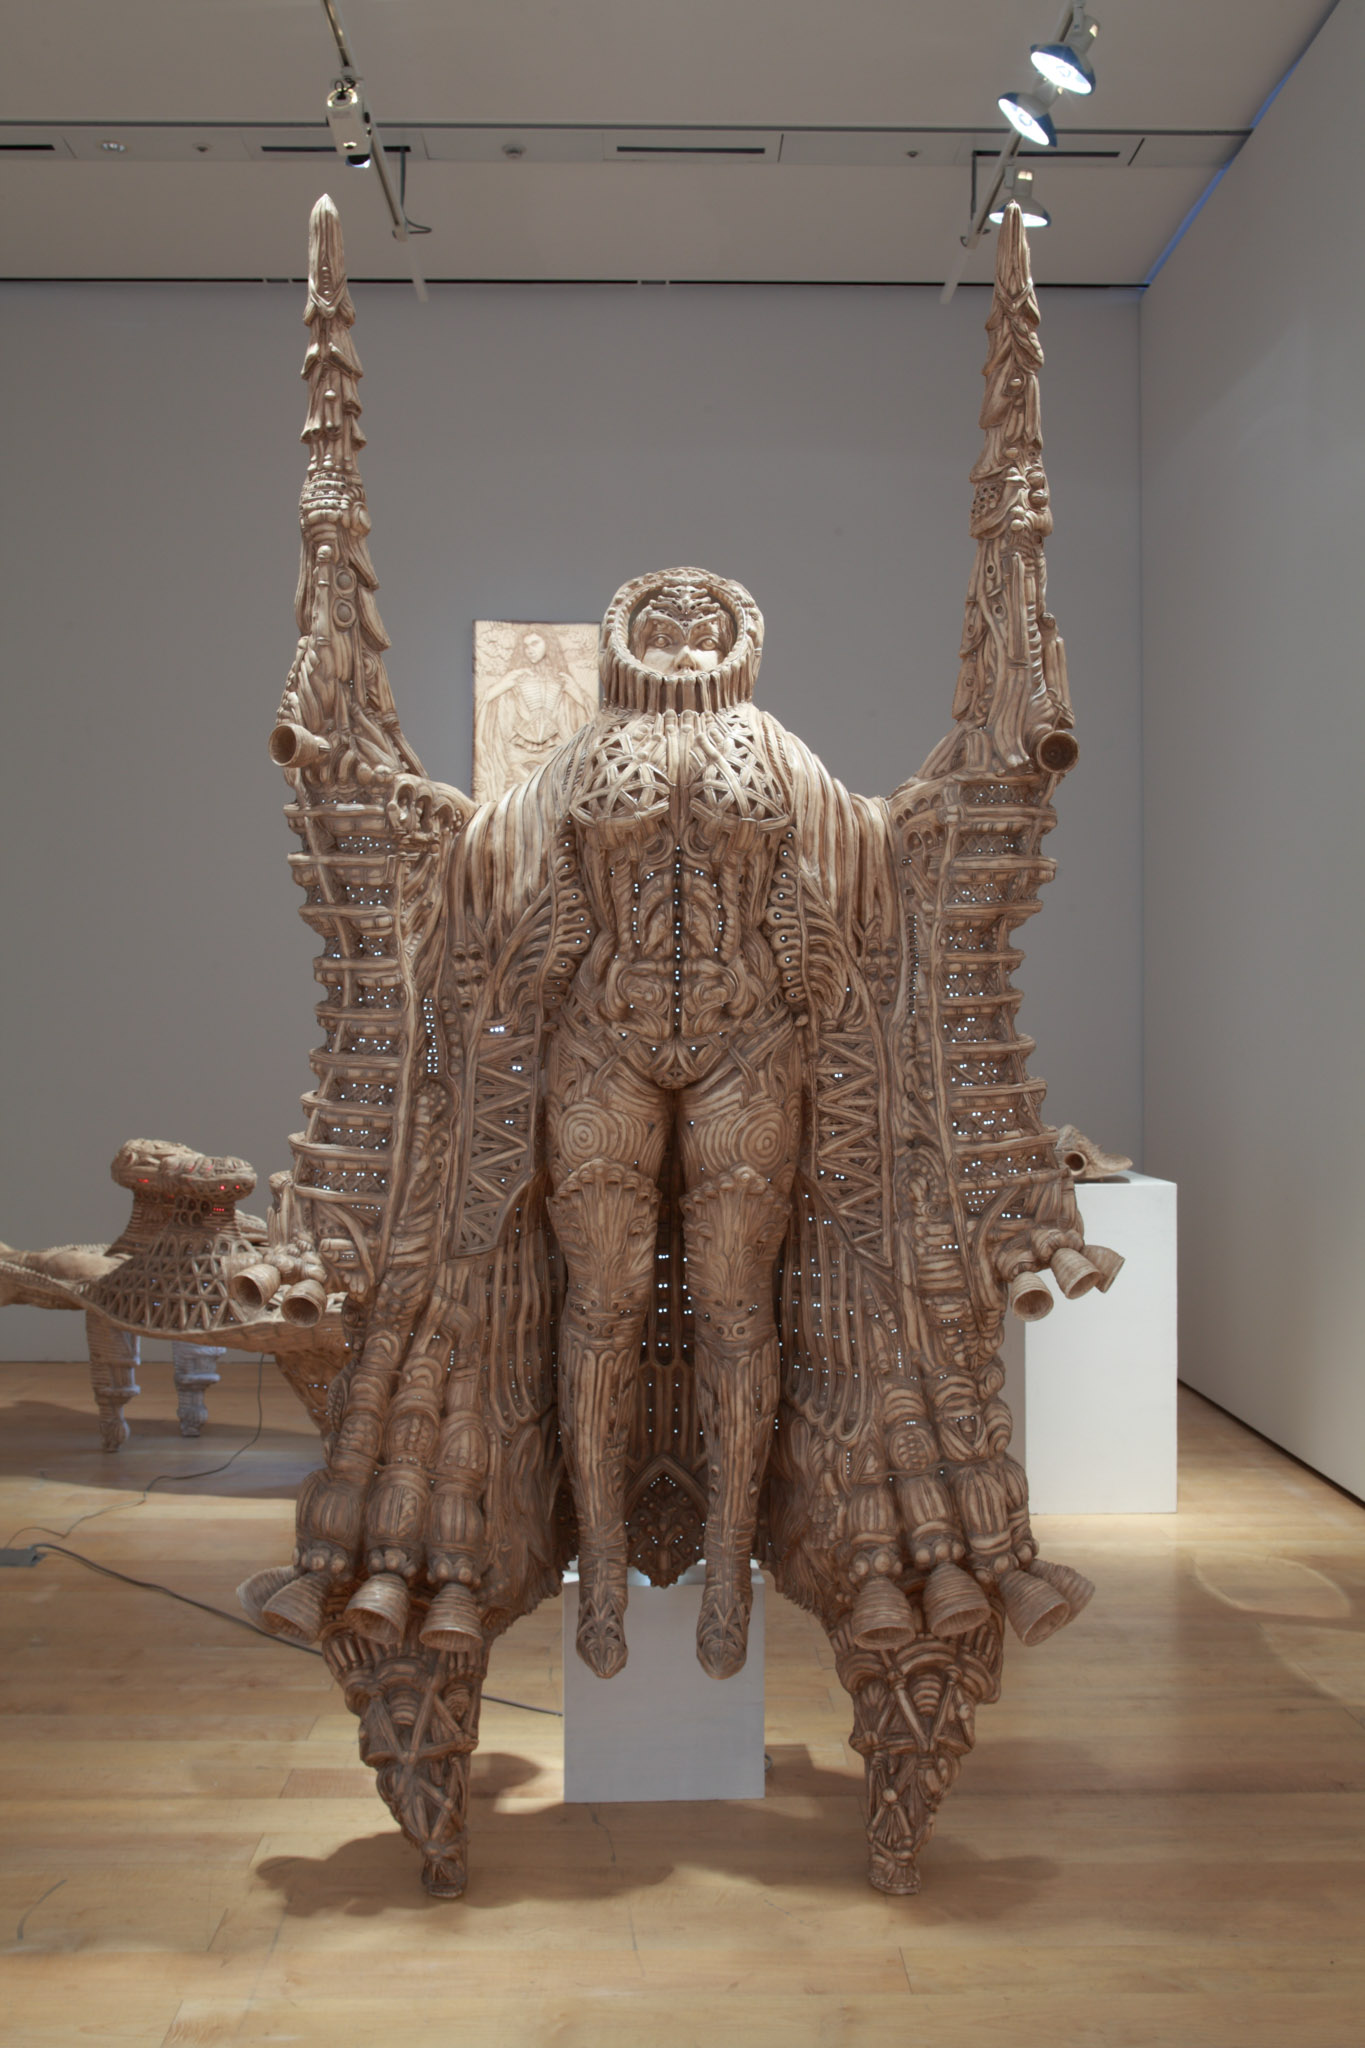 A life size sculpture depicting a person with wings.